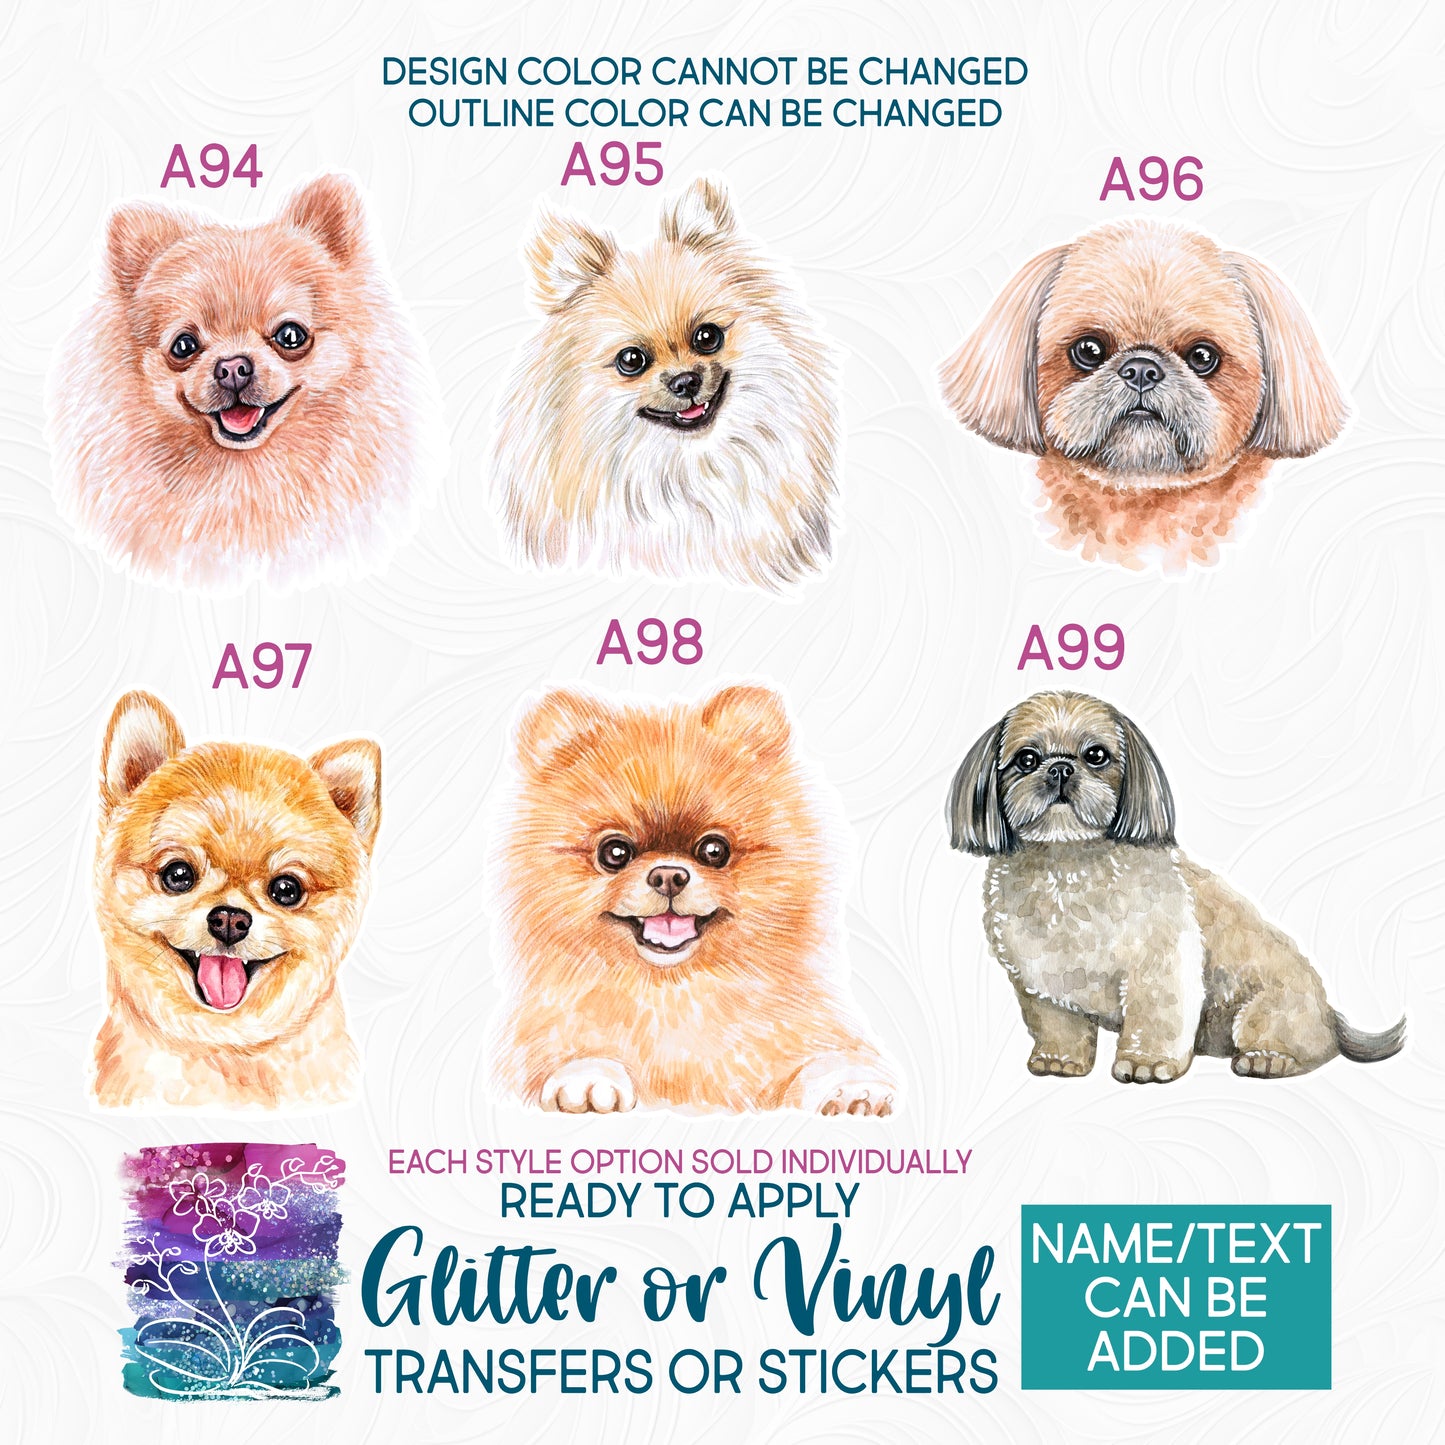 (s053-A) Watercolor Dogs Pomeranian or Shih Tzu Glitter or Vinyl Iron-On Transfer or Sticker